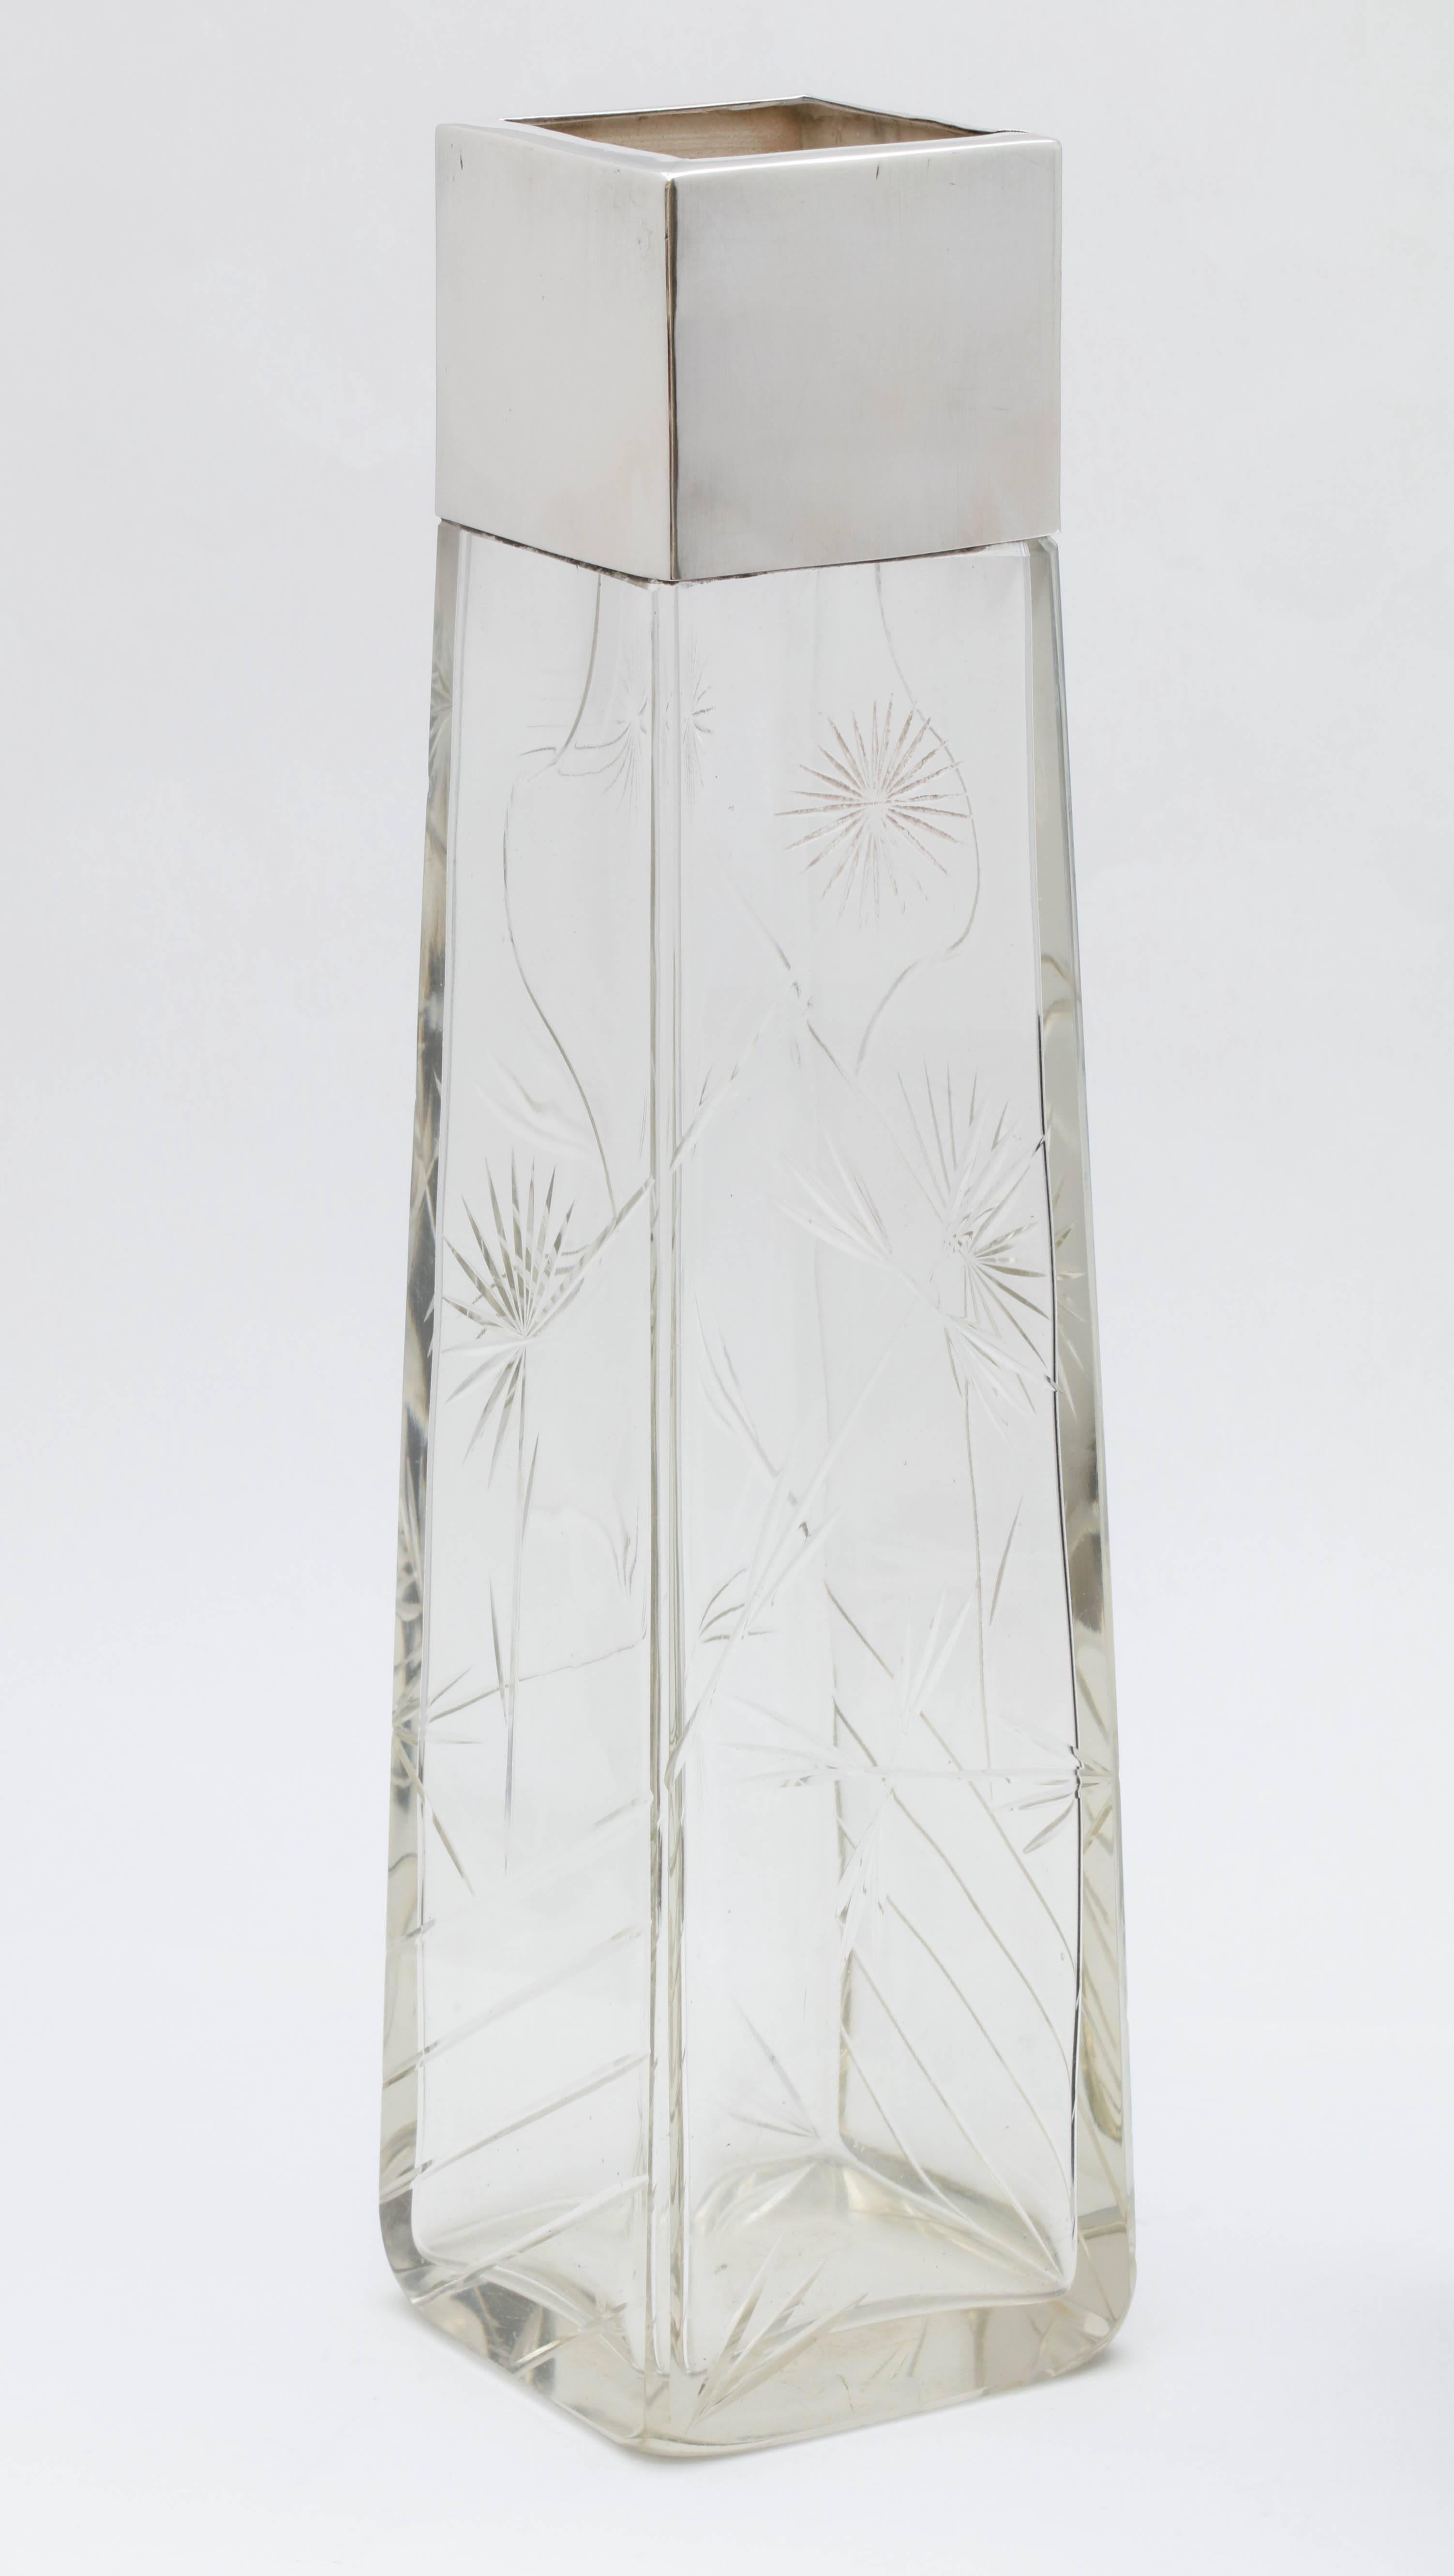 Lovely, Edwardian, sterling silver-mounted rectangular crystal vase in the Japonesque style, Birmingham, England, 1901, Sydney Thomas Steel - maker. Crystal is beautifully cut. Measures: 12 inches high x 3 1/4 inches wide (at widest point) x 3 1/4